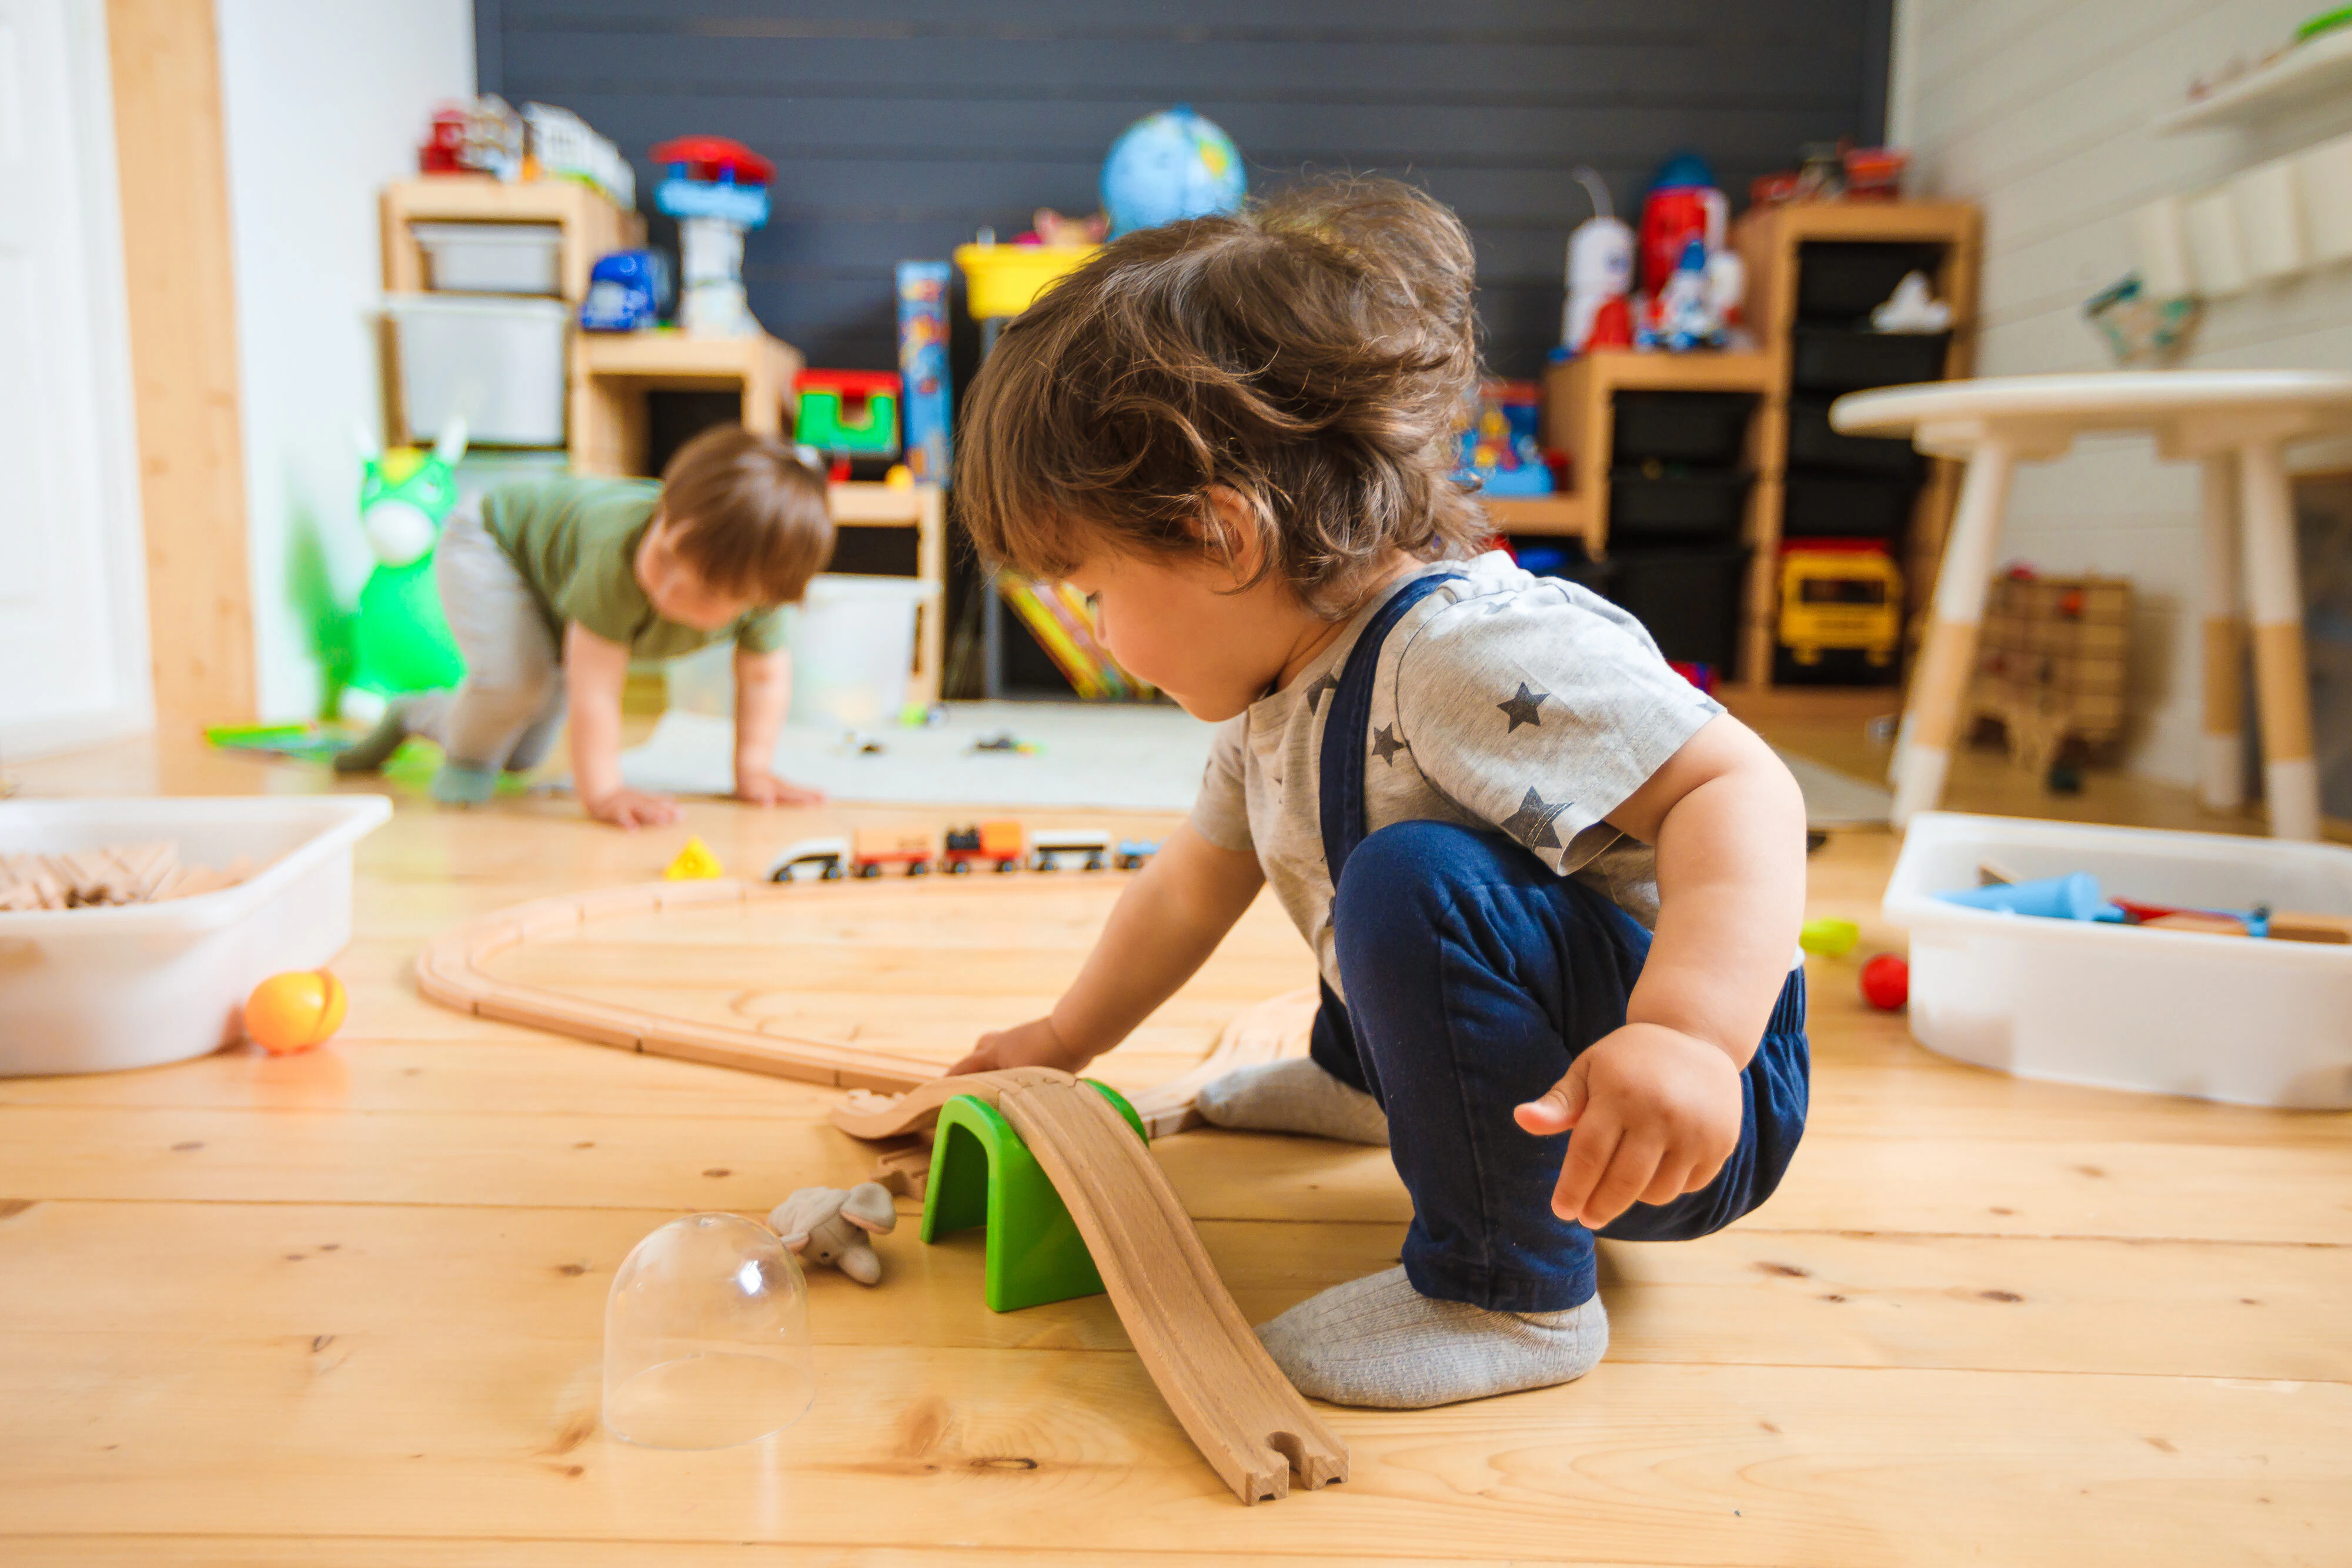 Employee childcare benefits result in organizations with workers who are less distracted, more satisfied with their jobs, and stay longer with their employer.